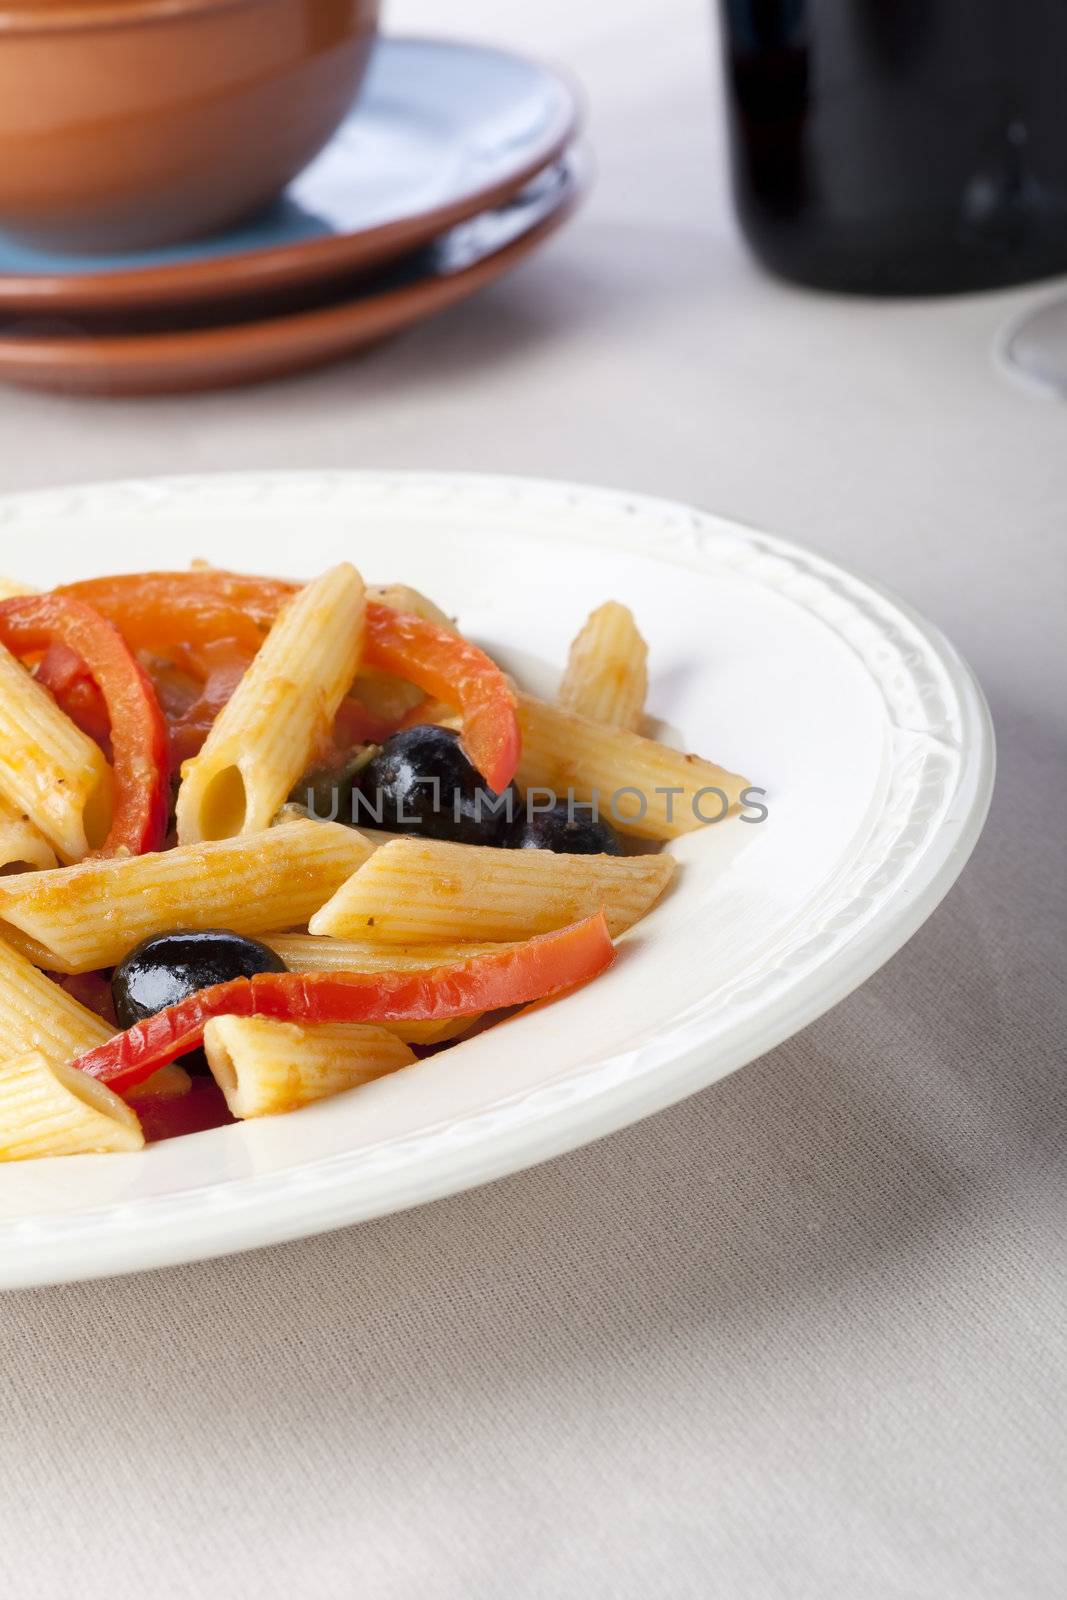 Penne pasta dinner with red bell peppers and black olives